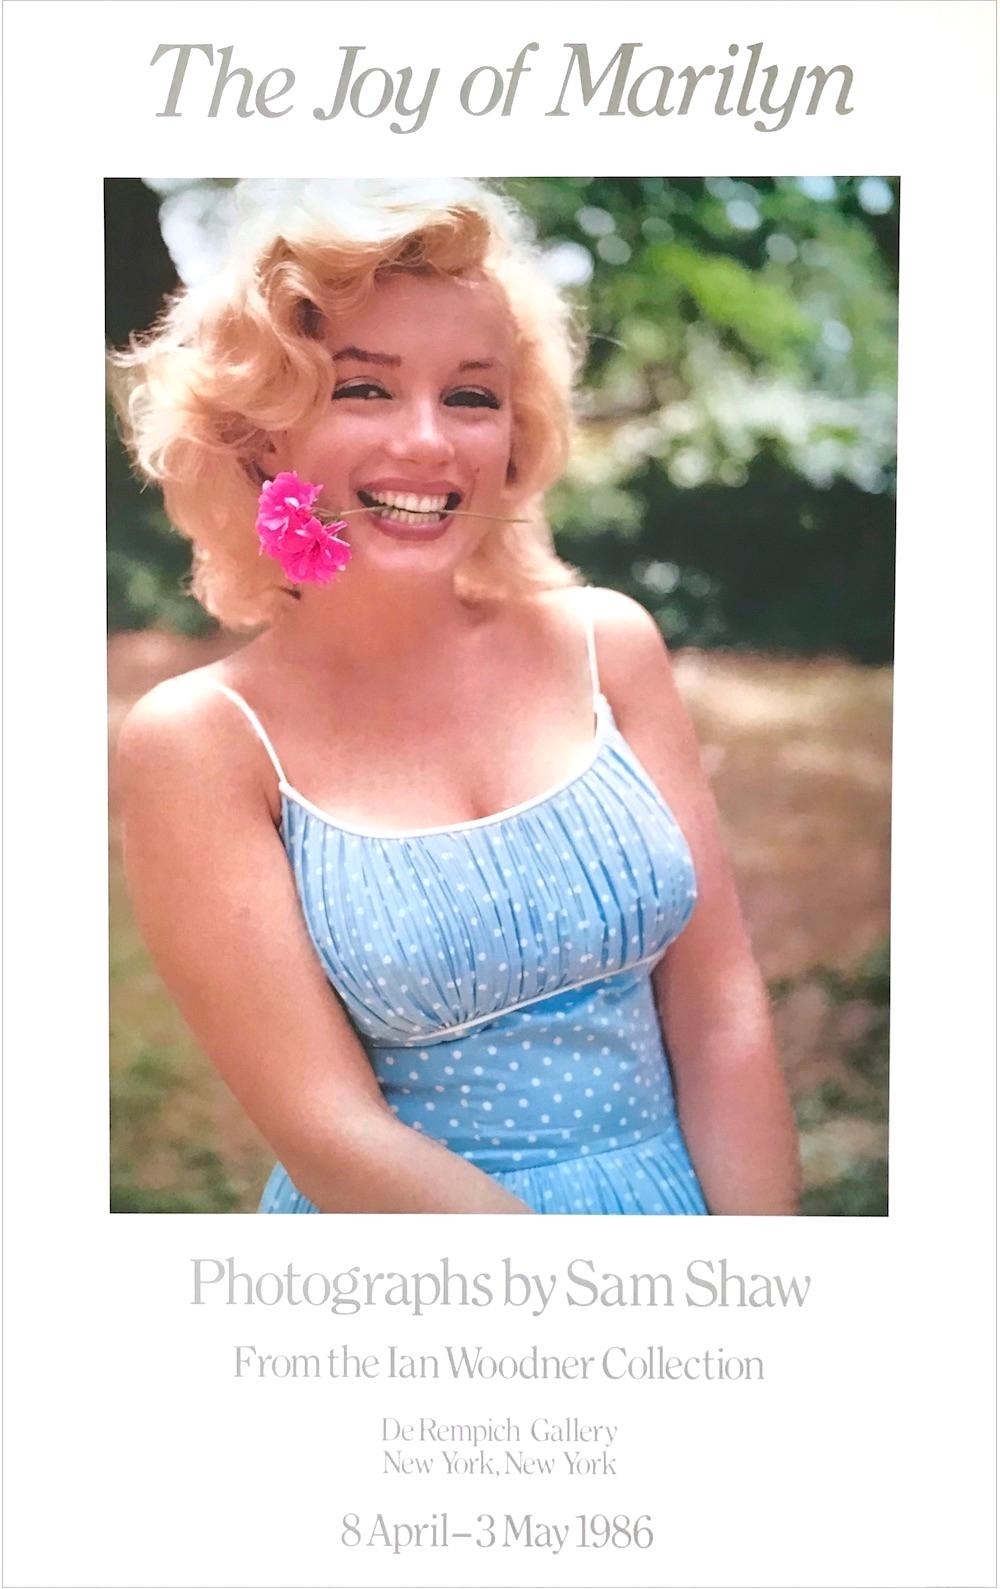 THE JOY OF MARILYN is a fine art exhibition poster by the renowned American photographer and film producer, Sam Shaw produced in 1986 in conjunction with Sam Shaw's photography exhibition in New York City. THE JOY OF MARILYN was printed using color